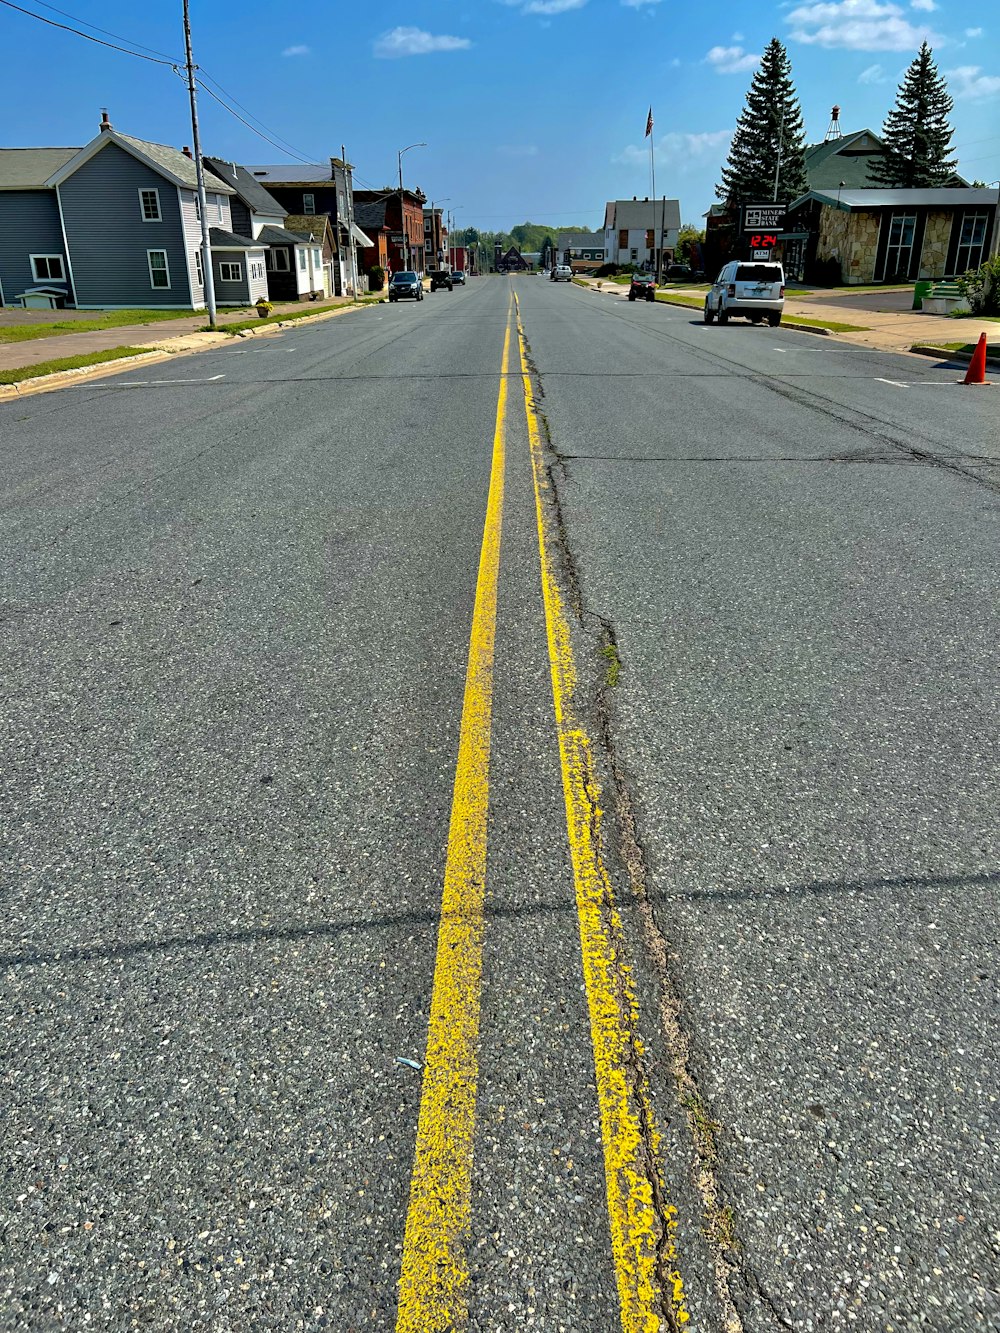 a street with a yellow line painted on it